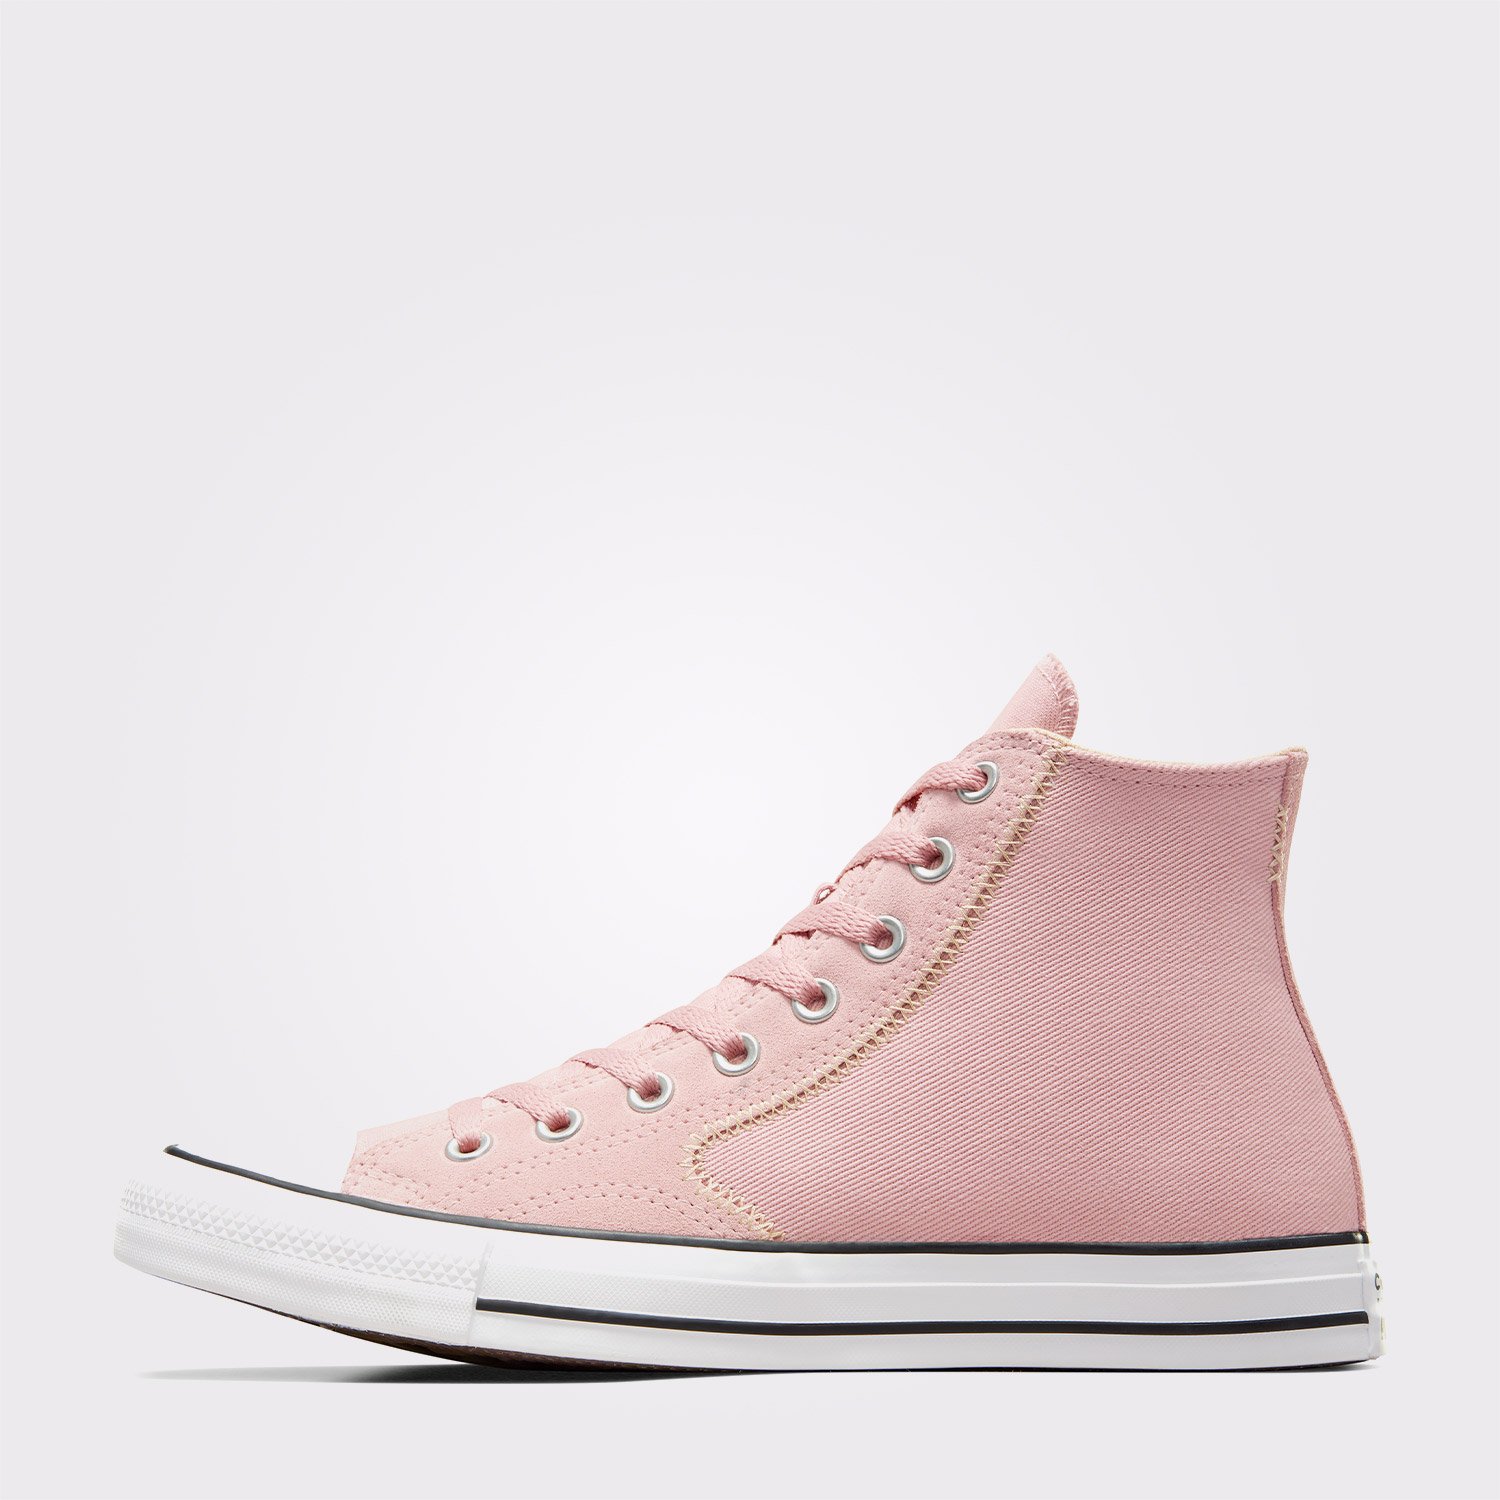 Converse Chuck Taylor All Star Mixed Materials Unisex Pembe Sneaker